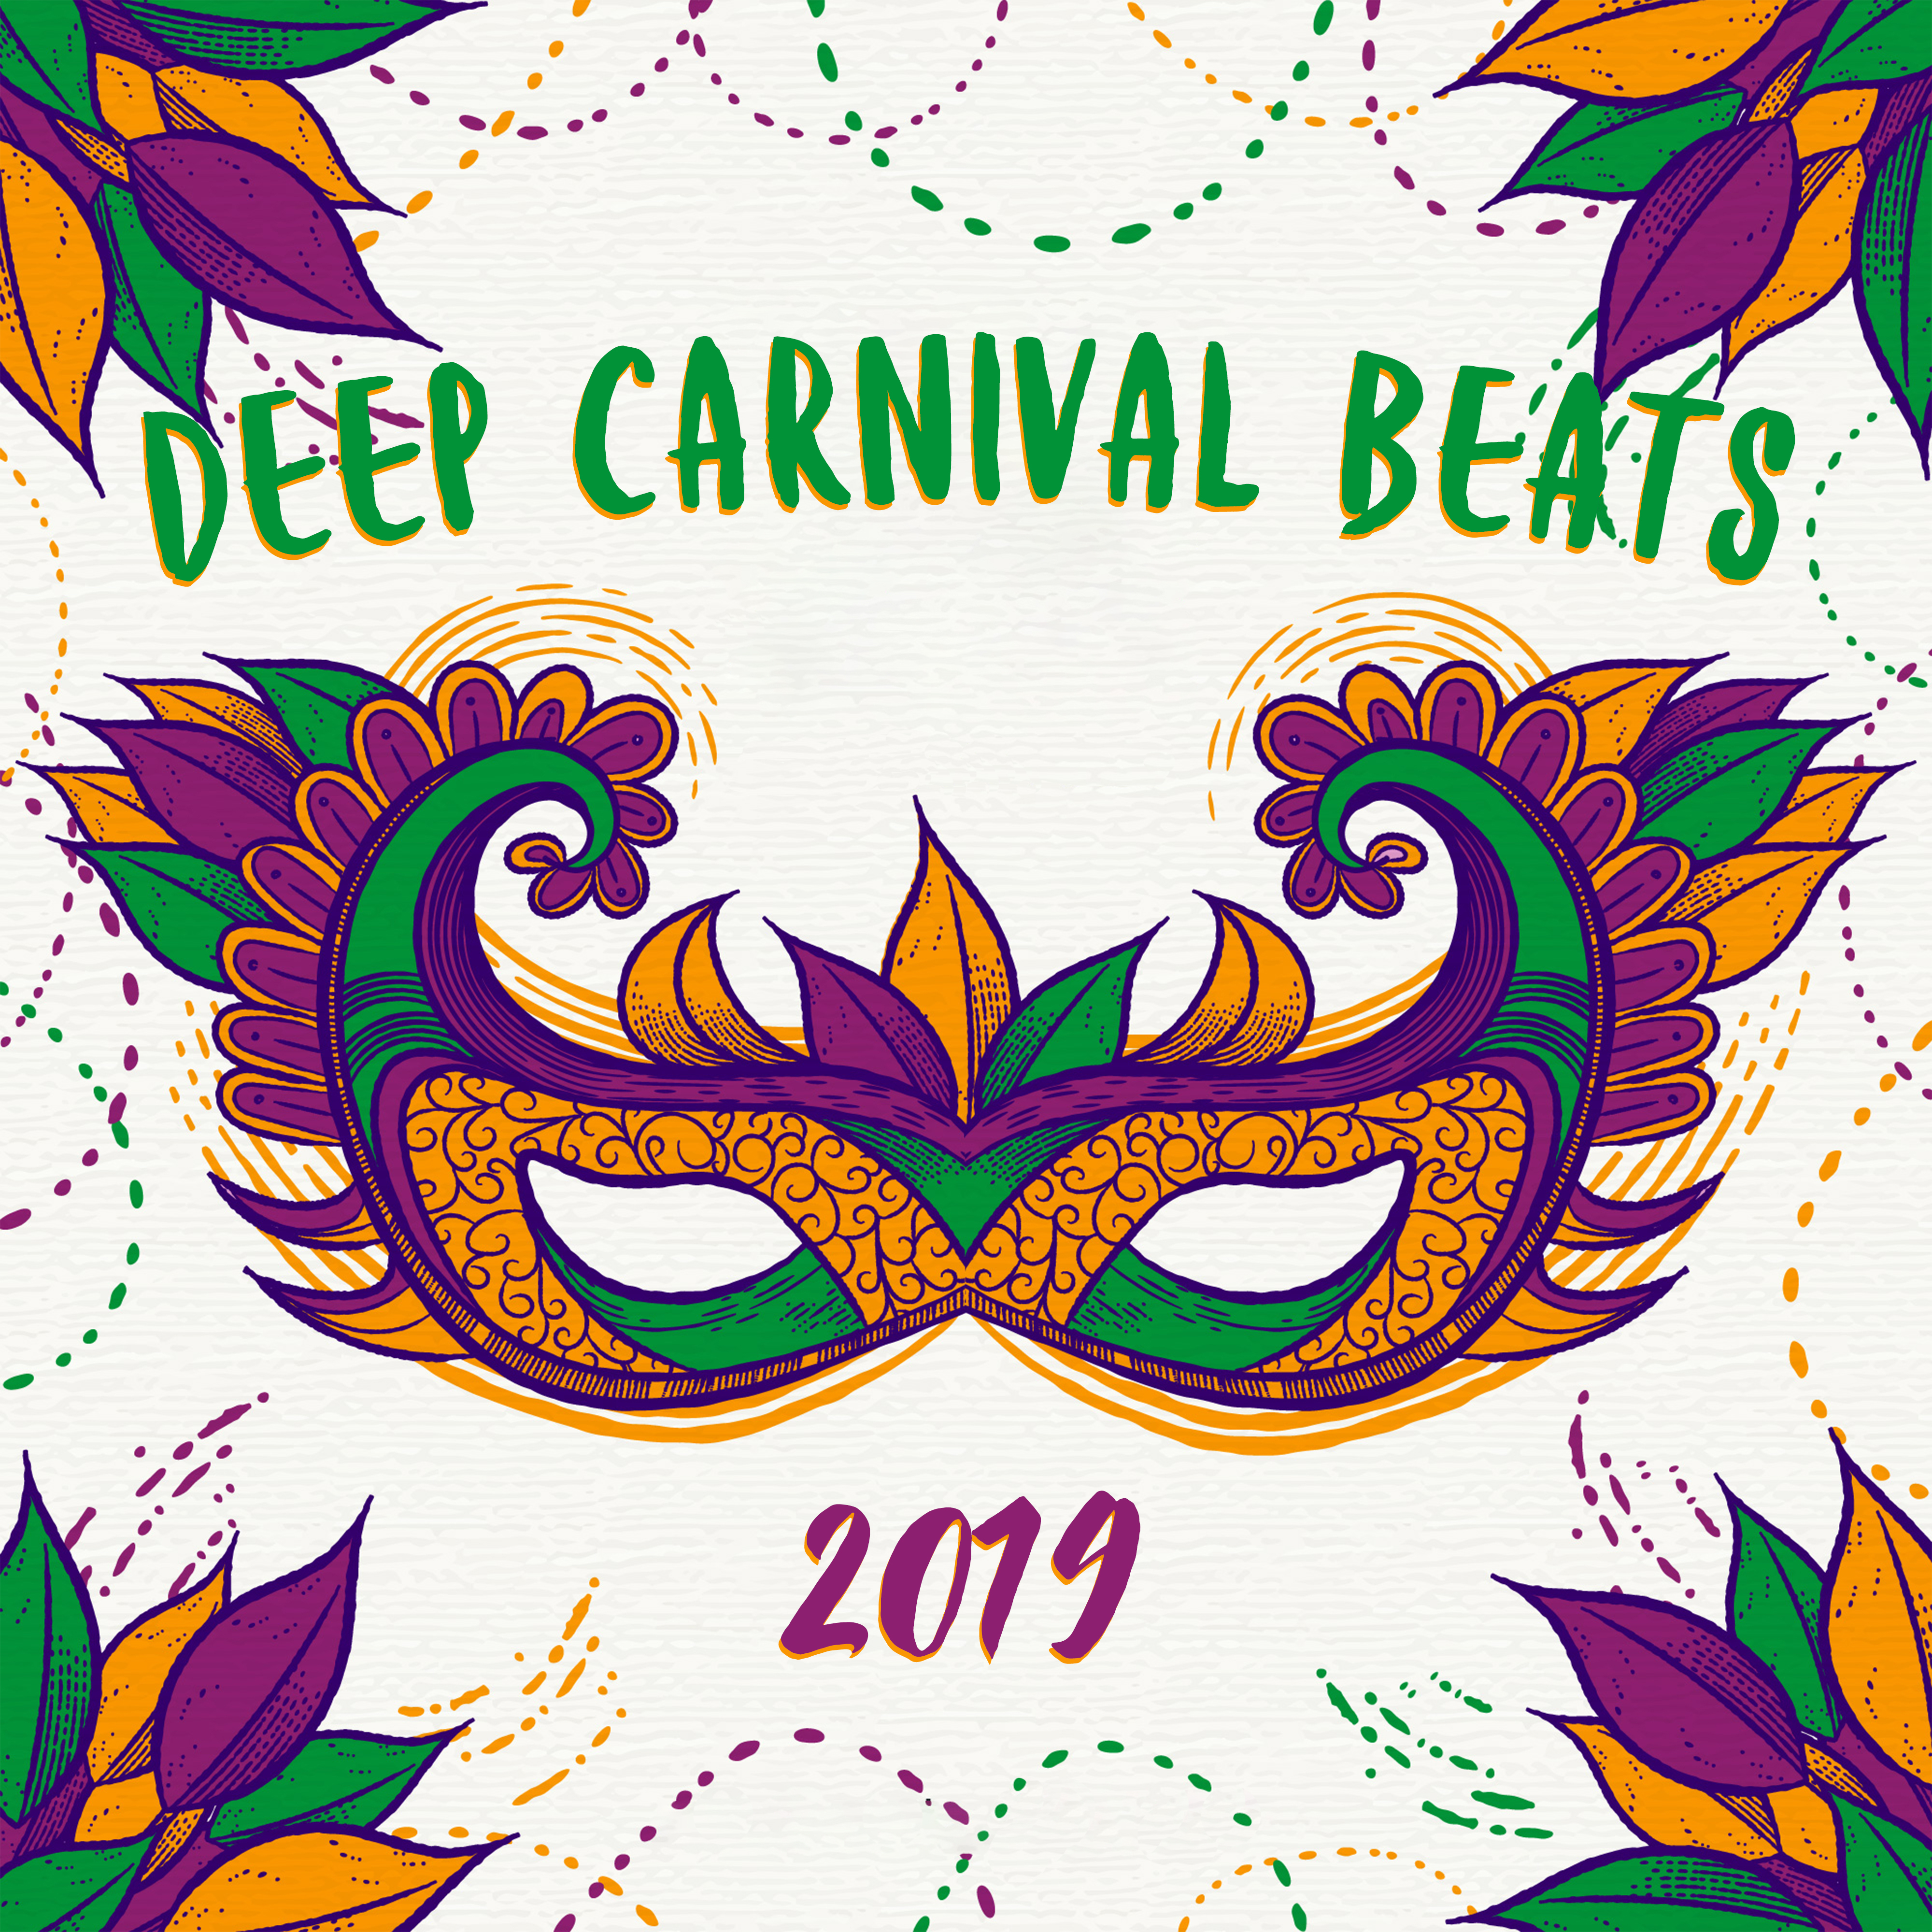 Deep Carnival Beats 2019  Carnival Chillout 2019,  Vibes, Dance Music, Carnival Party 2019, Chillout Lounge